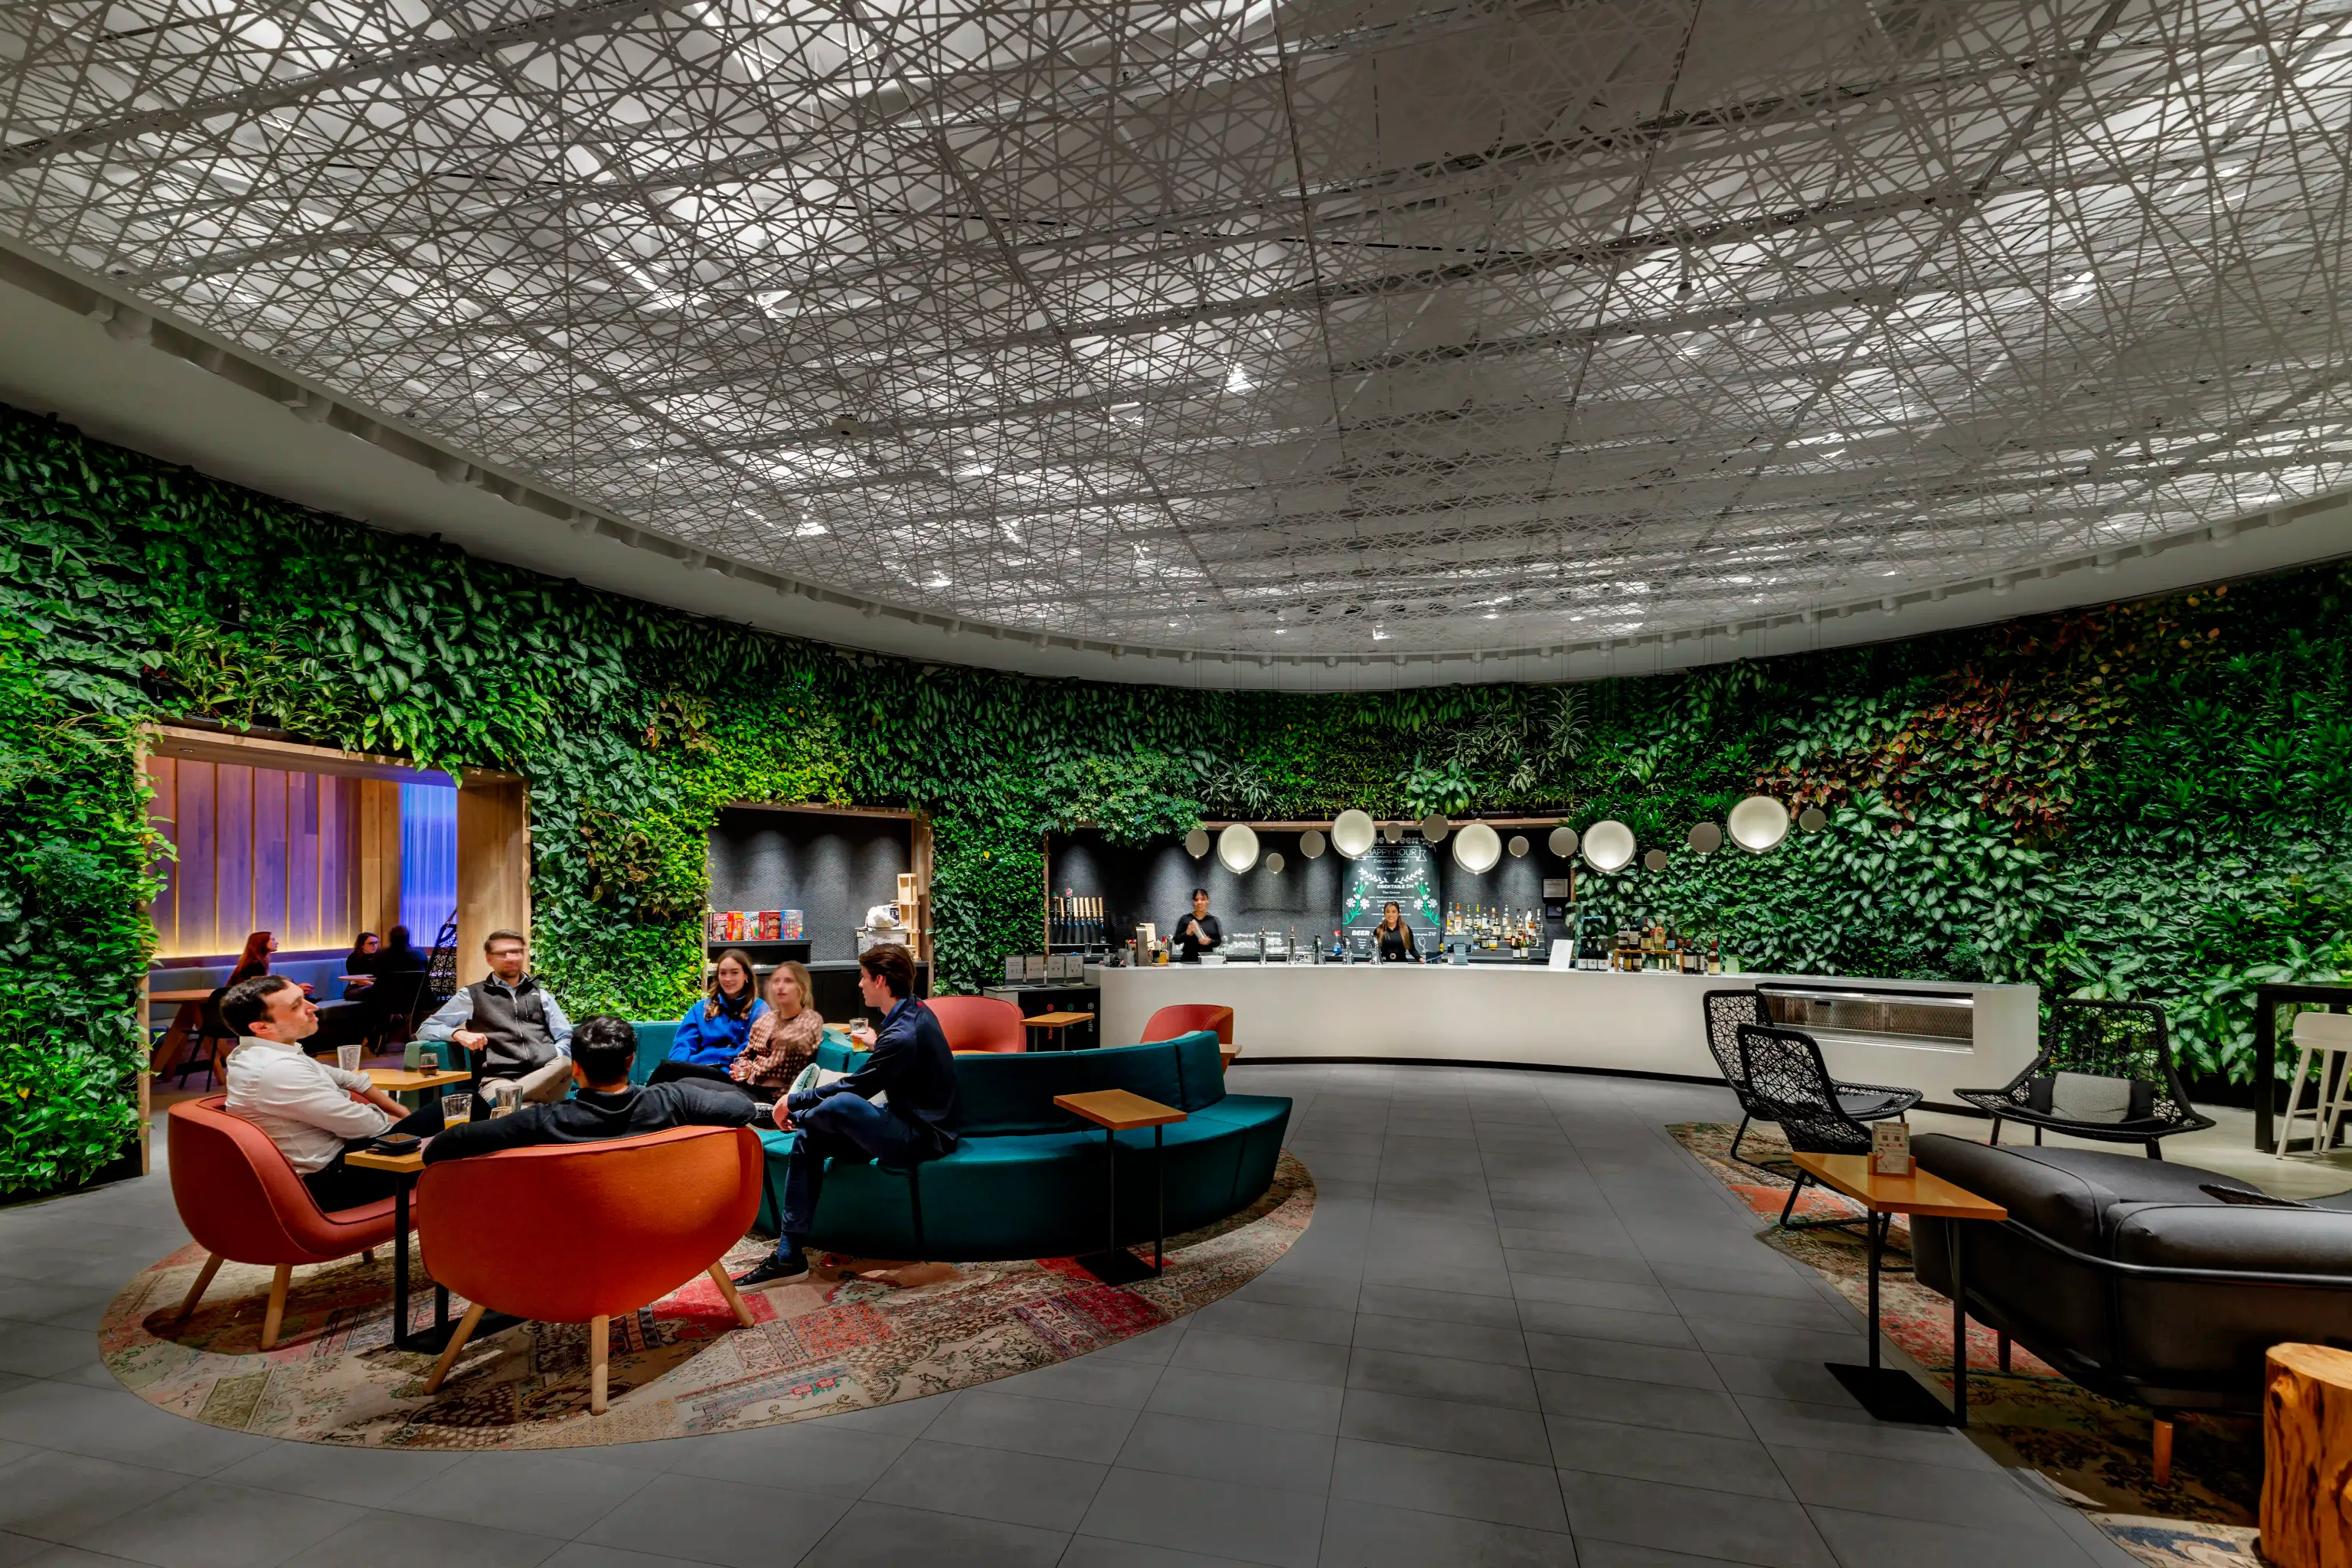 A lounge area with bar adorned with lush green plants growing on the walls, creating a refreshing and natural ambiance.